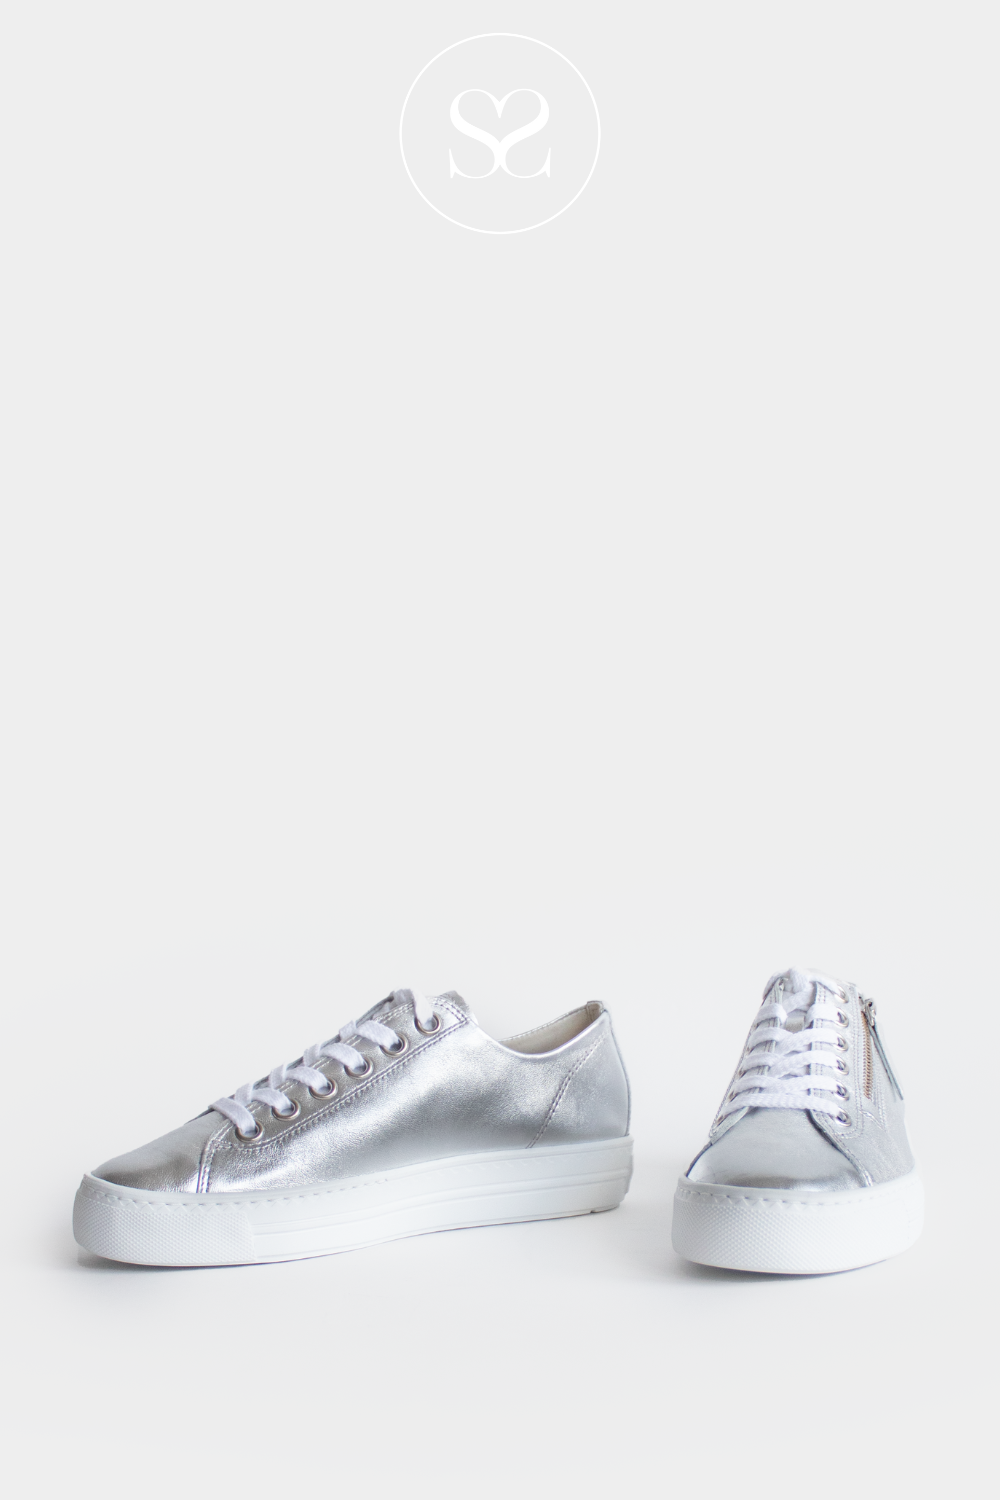 PAUL GREEN 5206 SILVER LEATHER FLATFORM TRAINERS